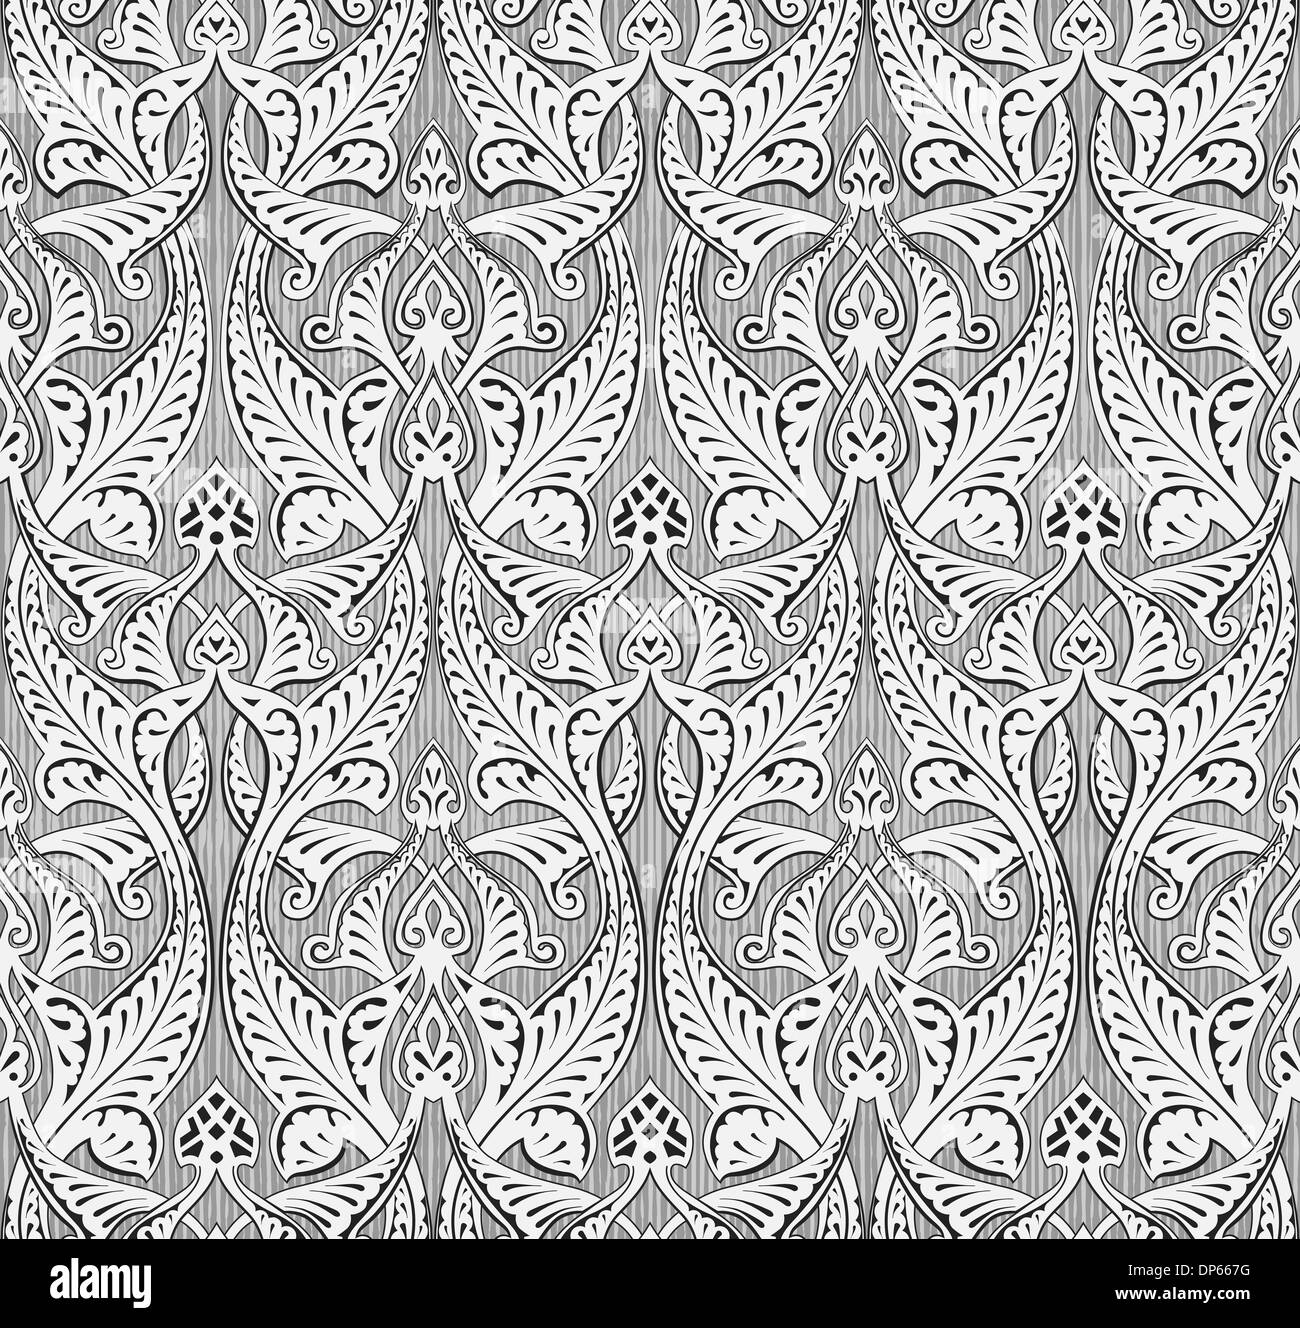 Illustration of a vintage intricate seamlessly tilable repeating Islamic motif background pattern swatch Stock Photo